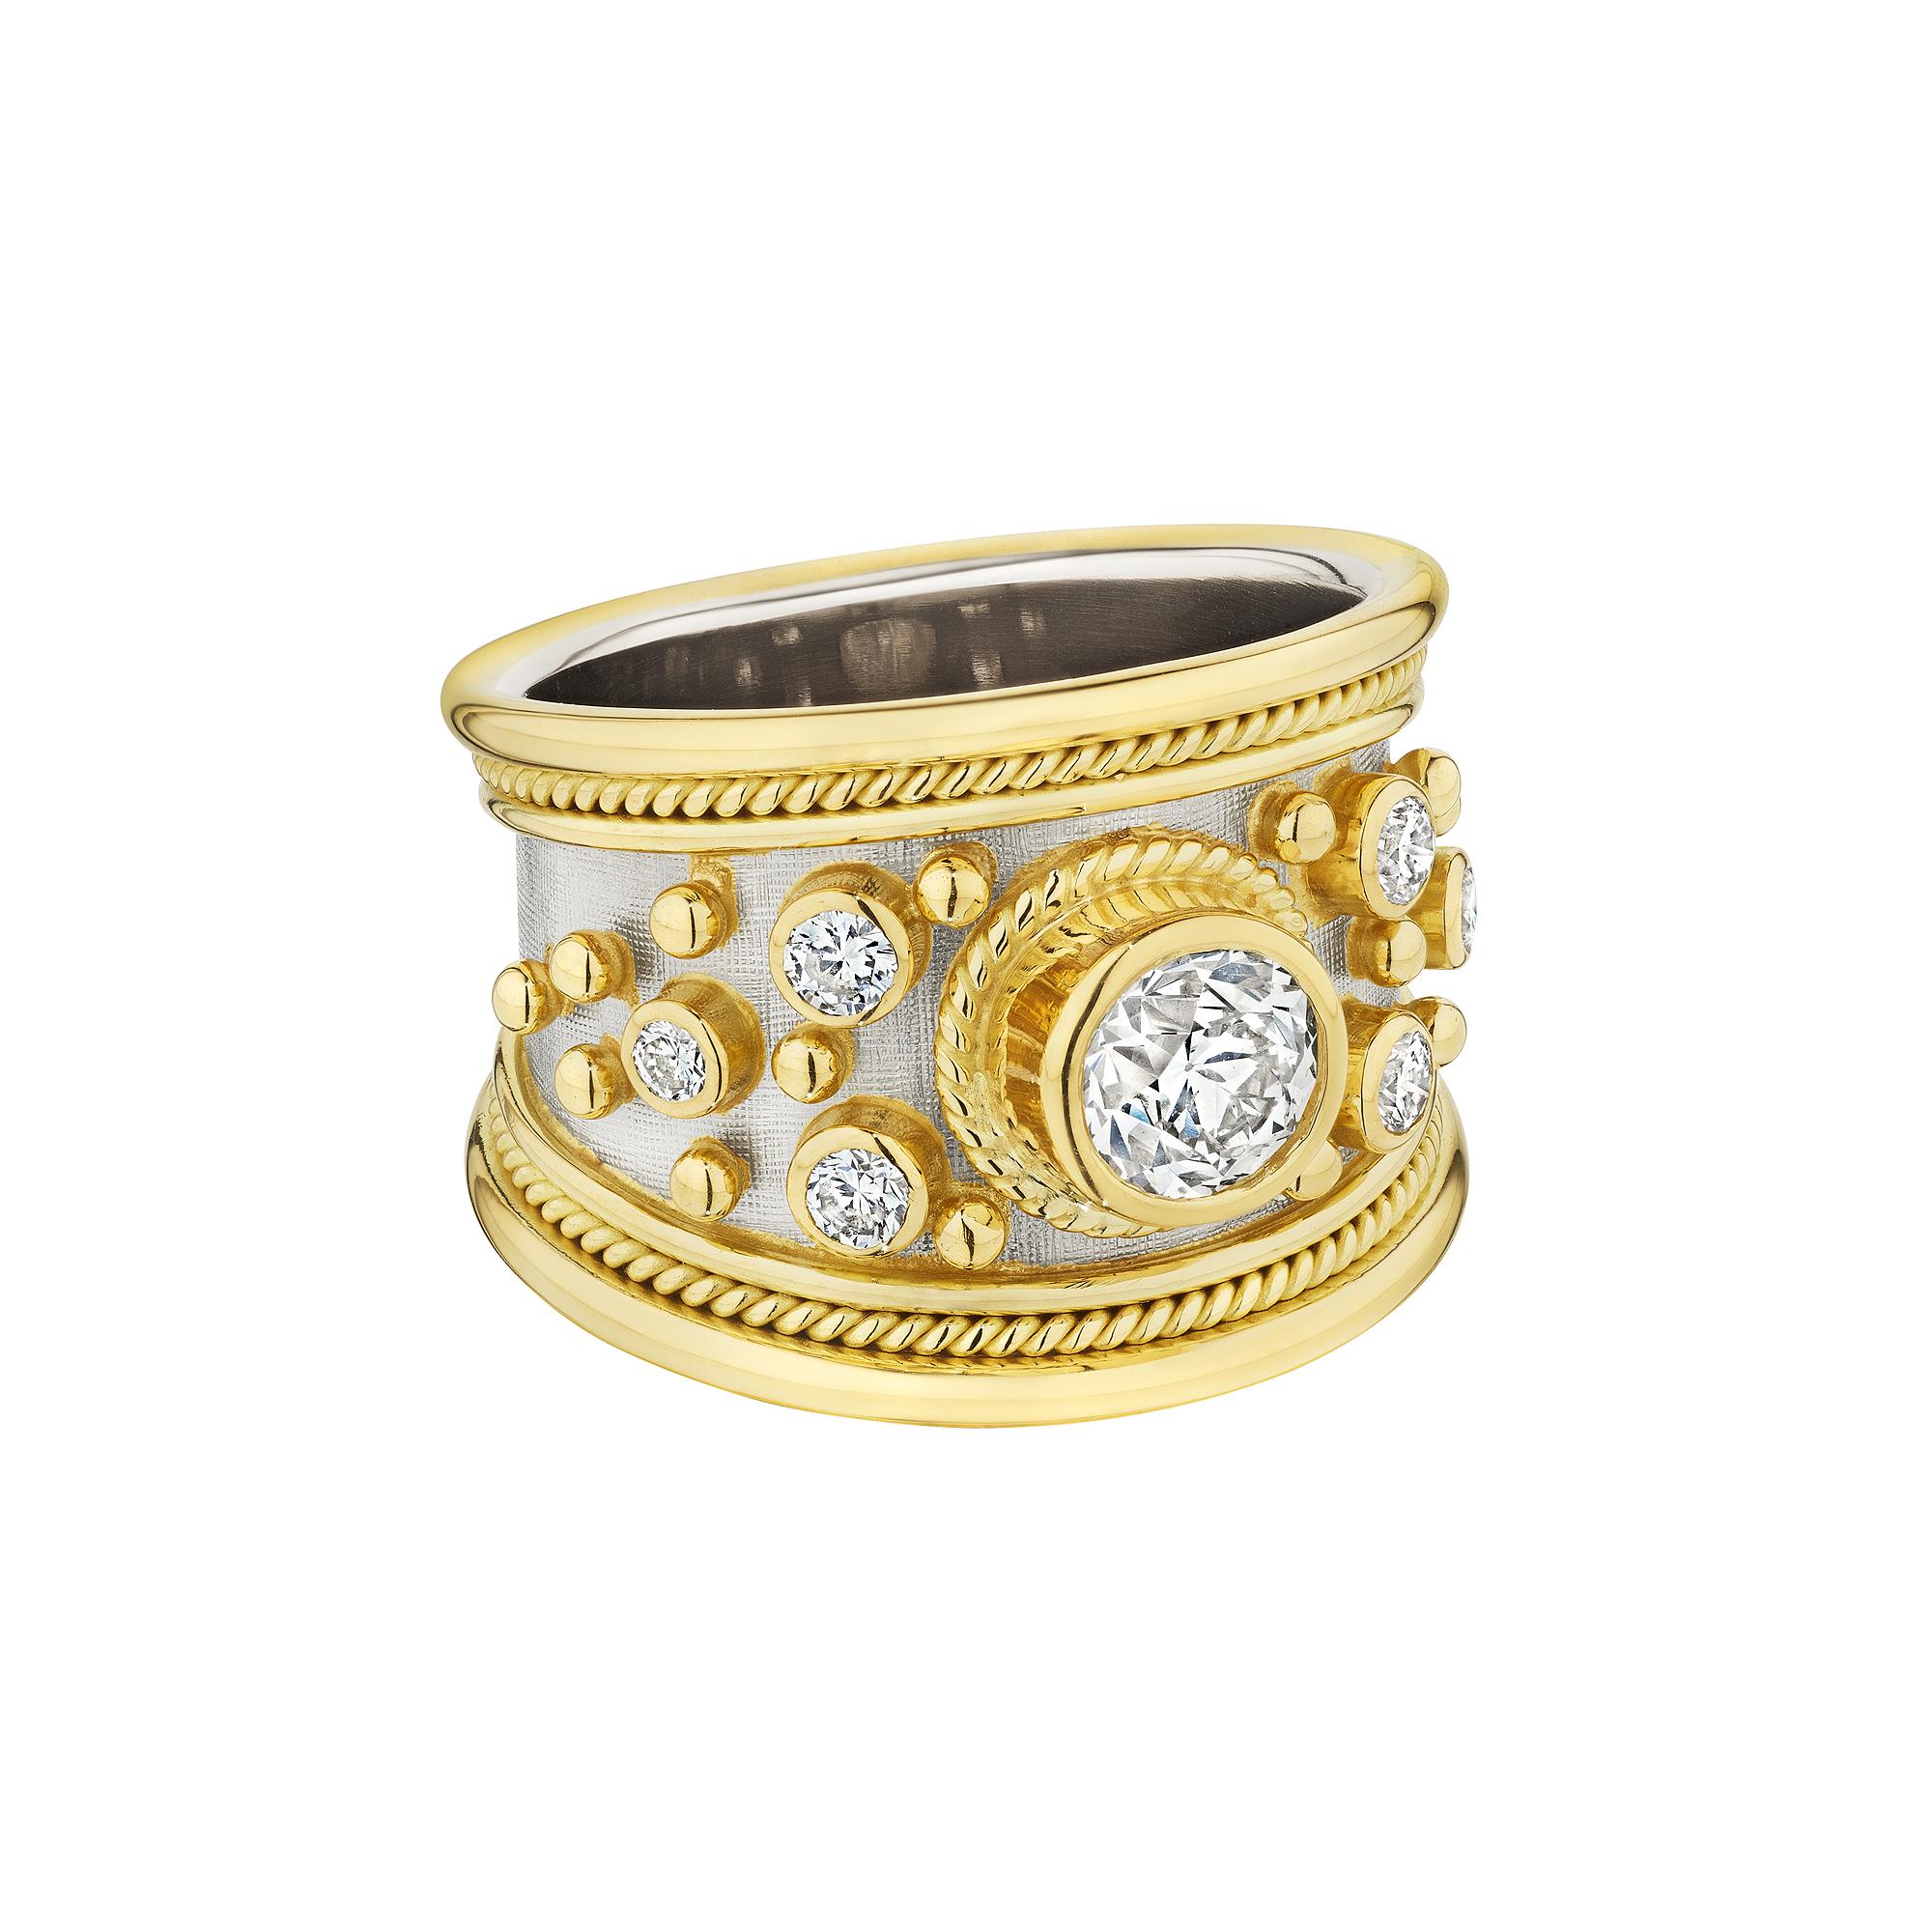 Shimmering like celestial stars from afar this Elizabeth Cage 'Templar' diamond white and yellow 18 karat gold band ring is heavenly. With a .75 carat round cut center bezel set diamond and six round cut side diamonds interspersed with gold beading,